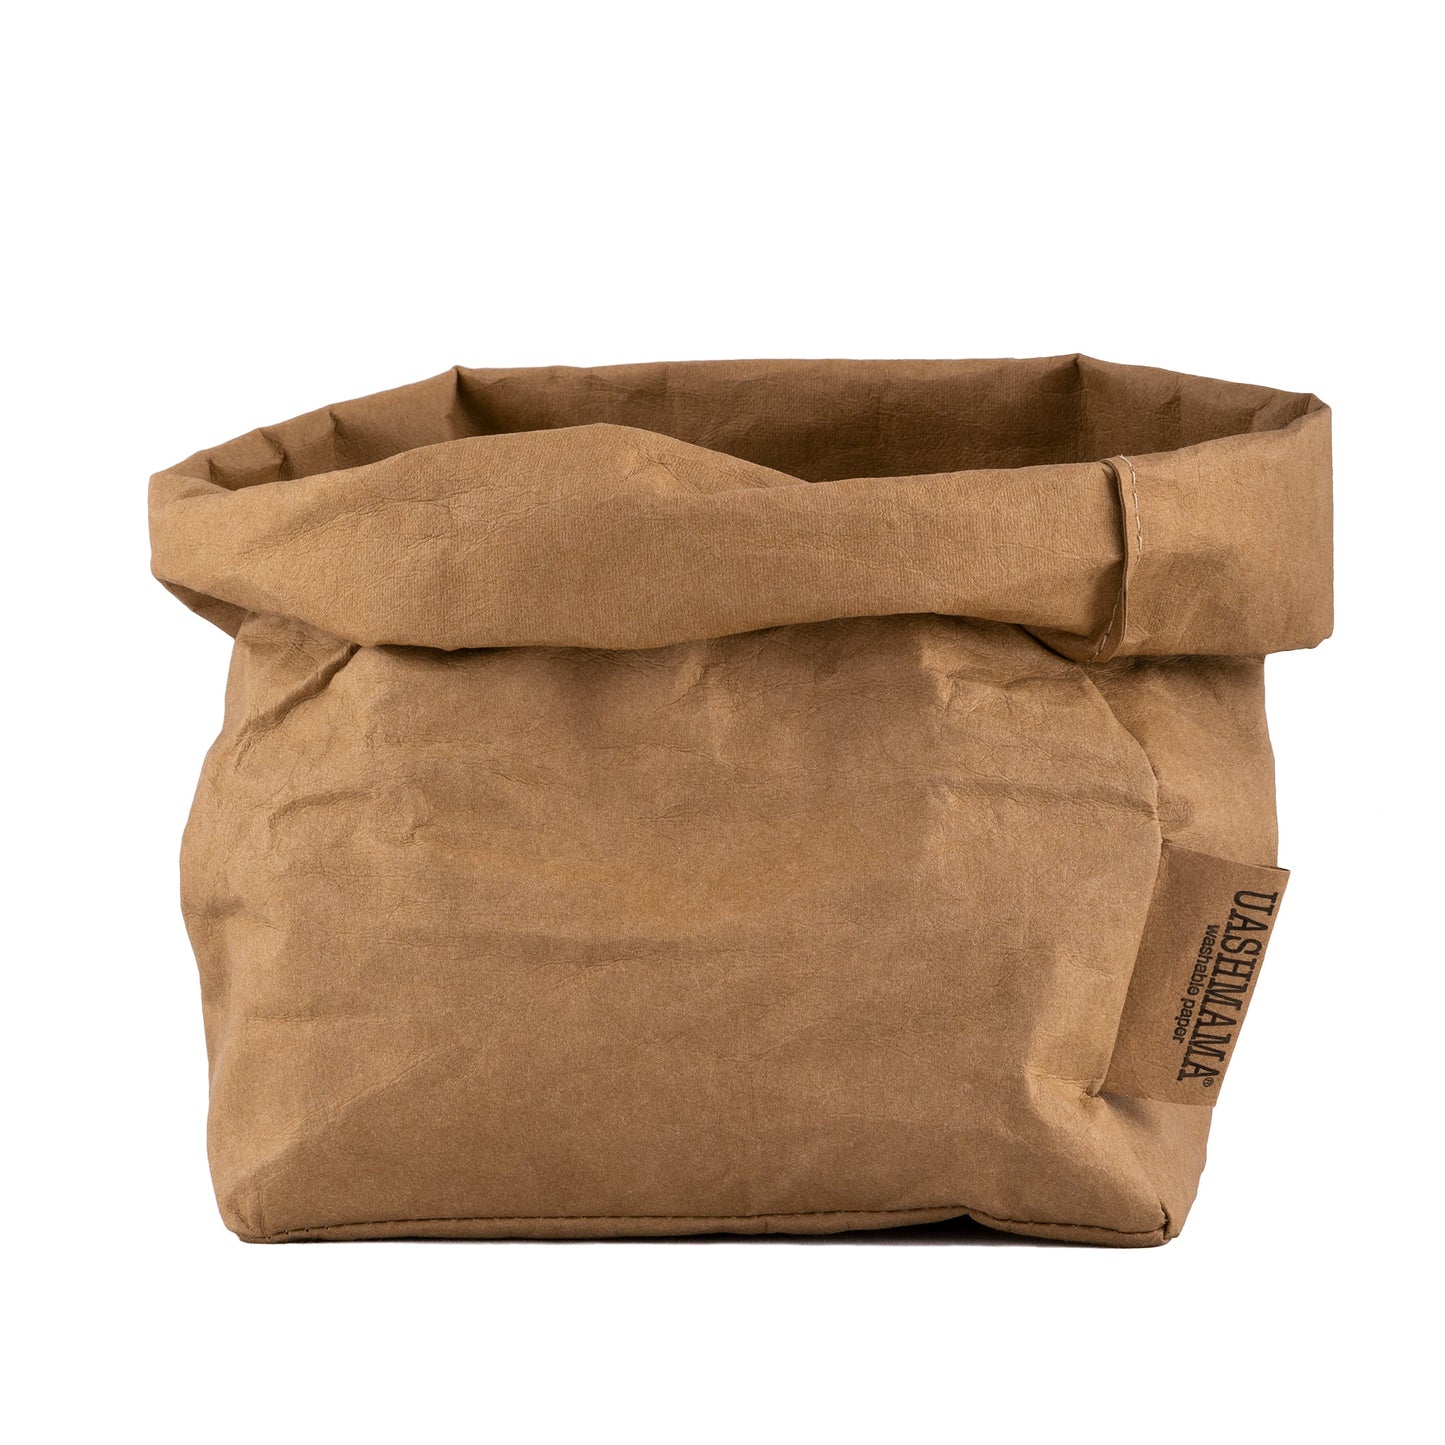 A washable paper bag is shown. The bag is rolled down at the top and features a UASHMAMA logo label on the bottom left corner. The bag pictured is the medium size in tan.